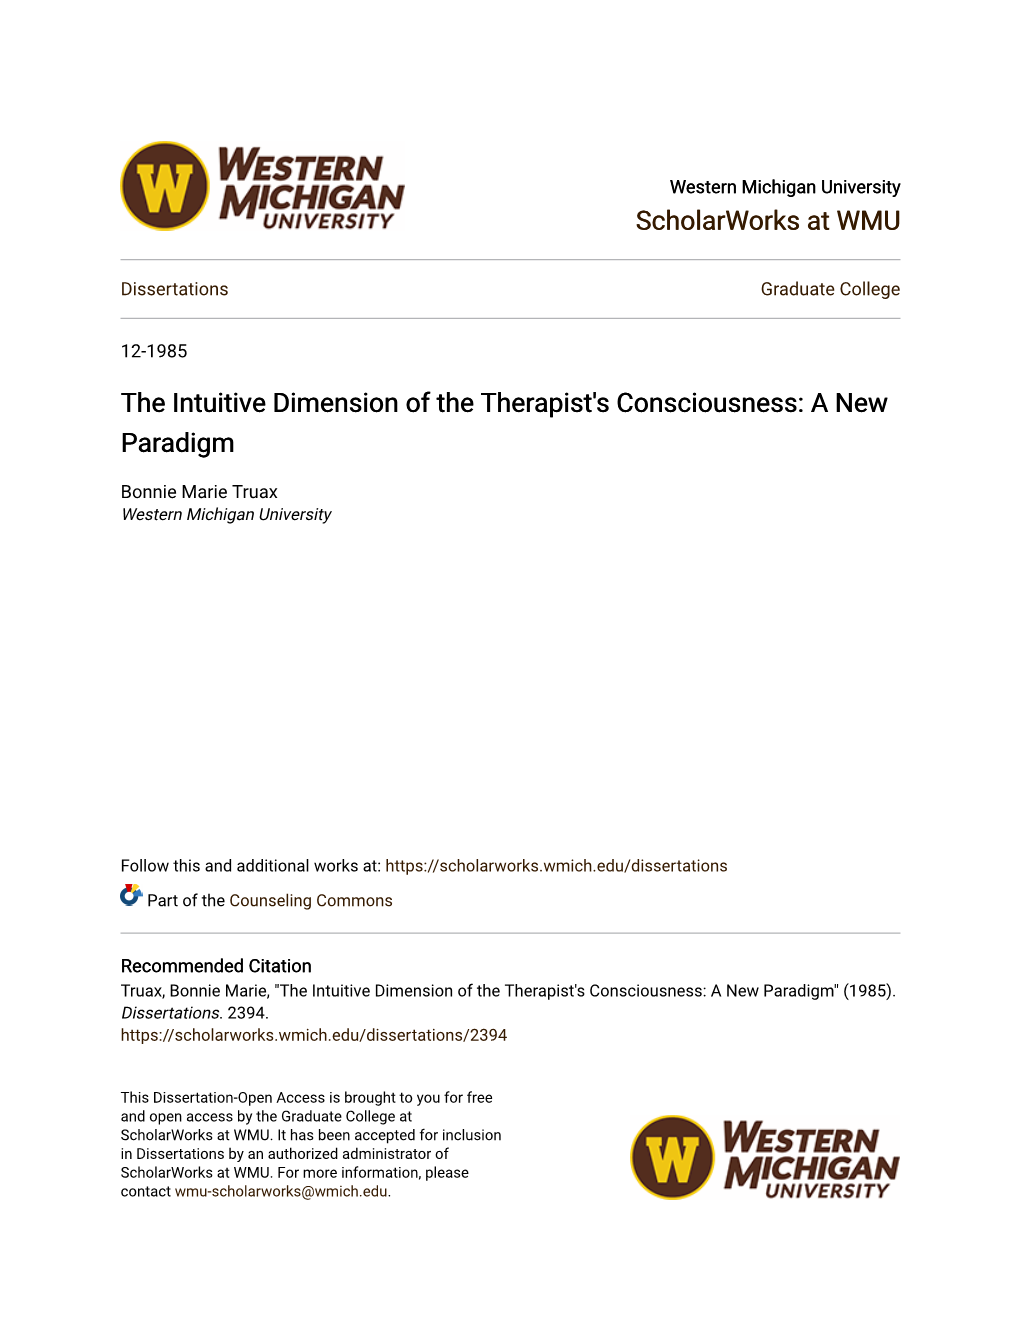 The Intuitive Dimension of the Therapist's Consciousness: a New Paradigm